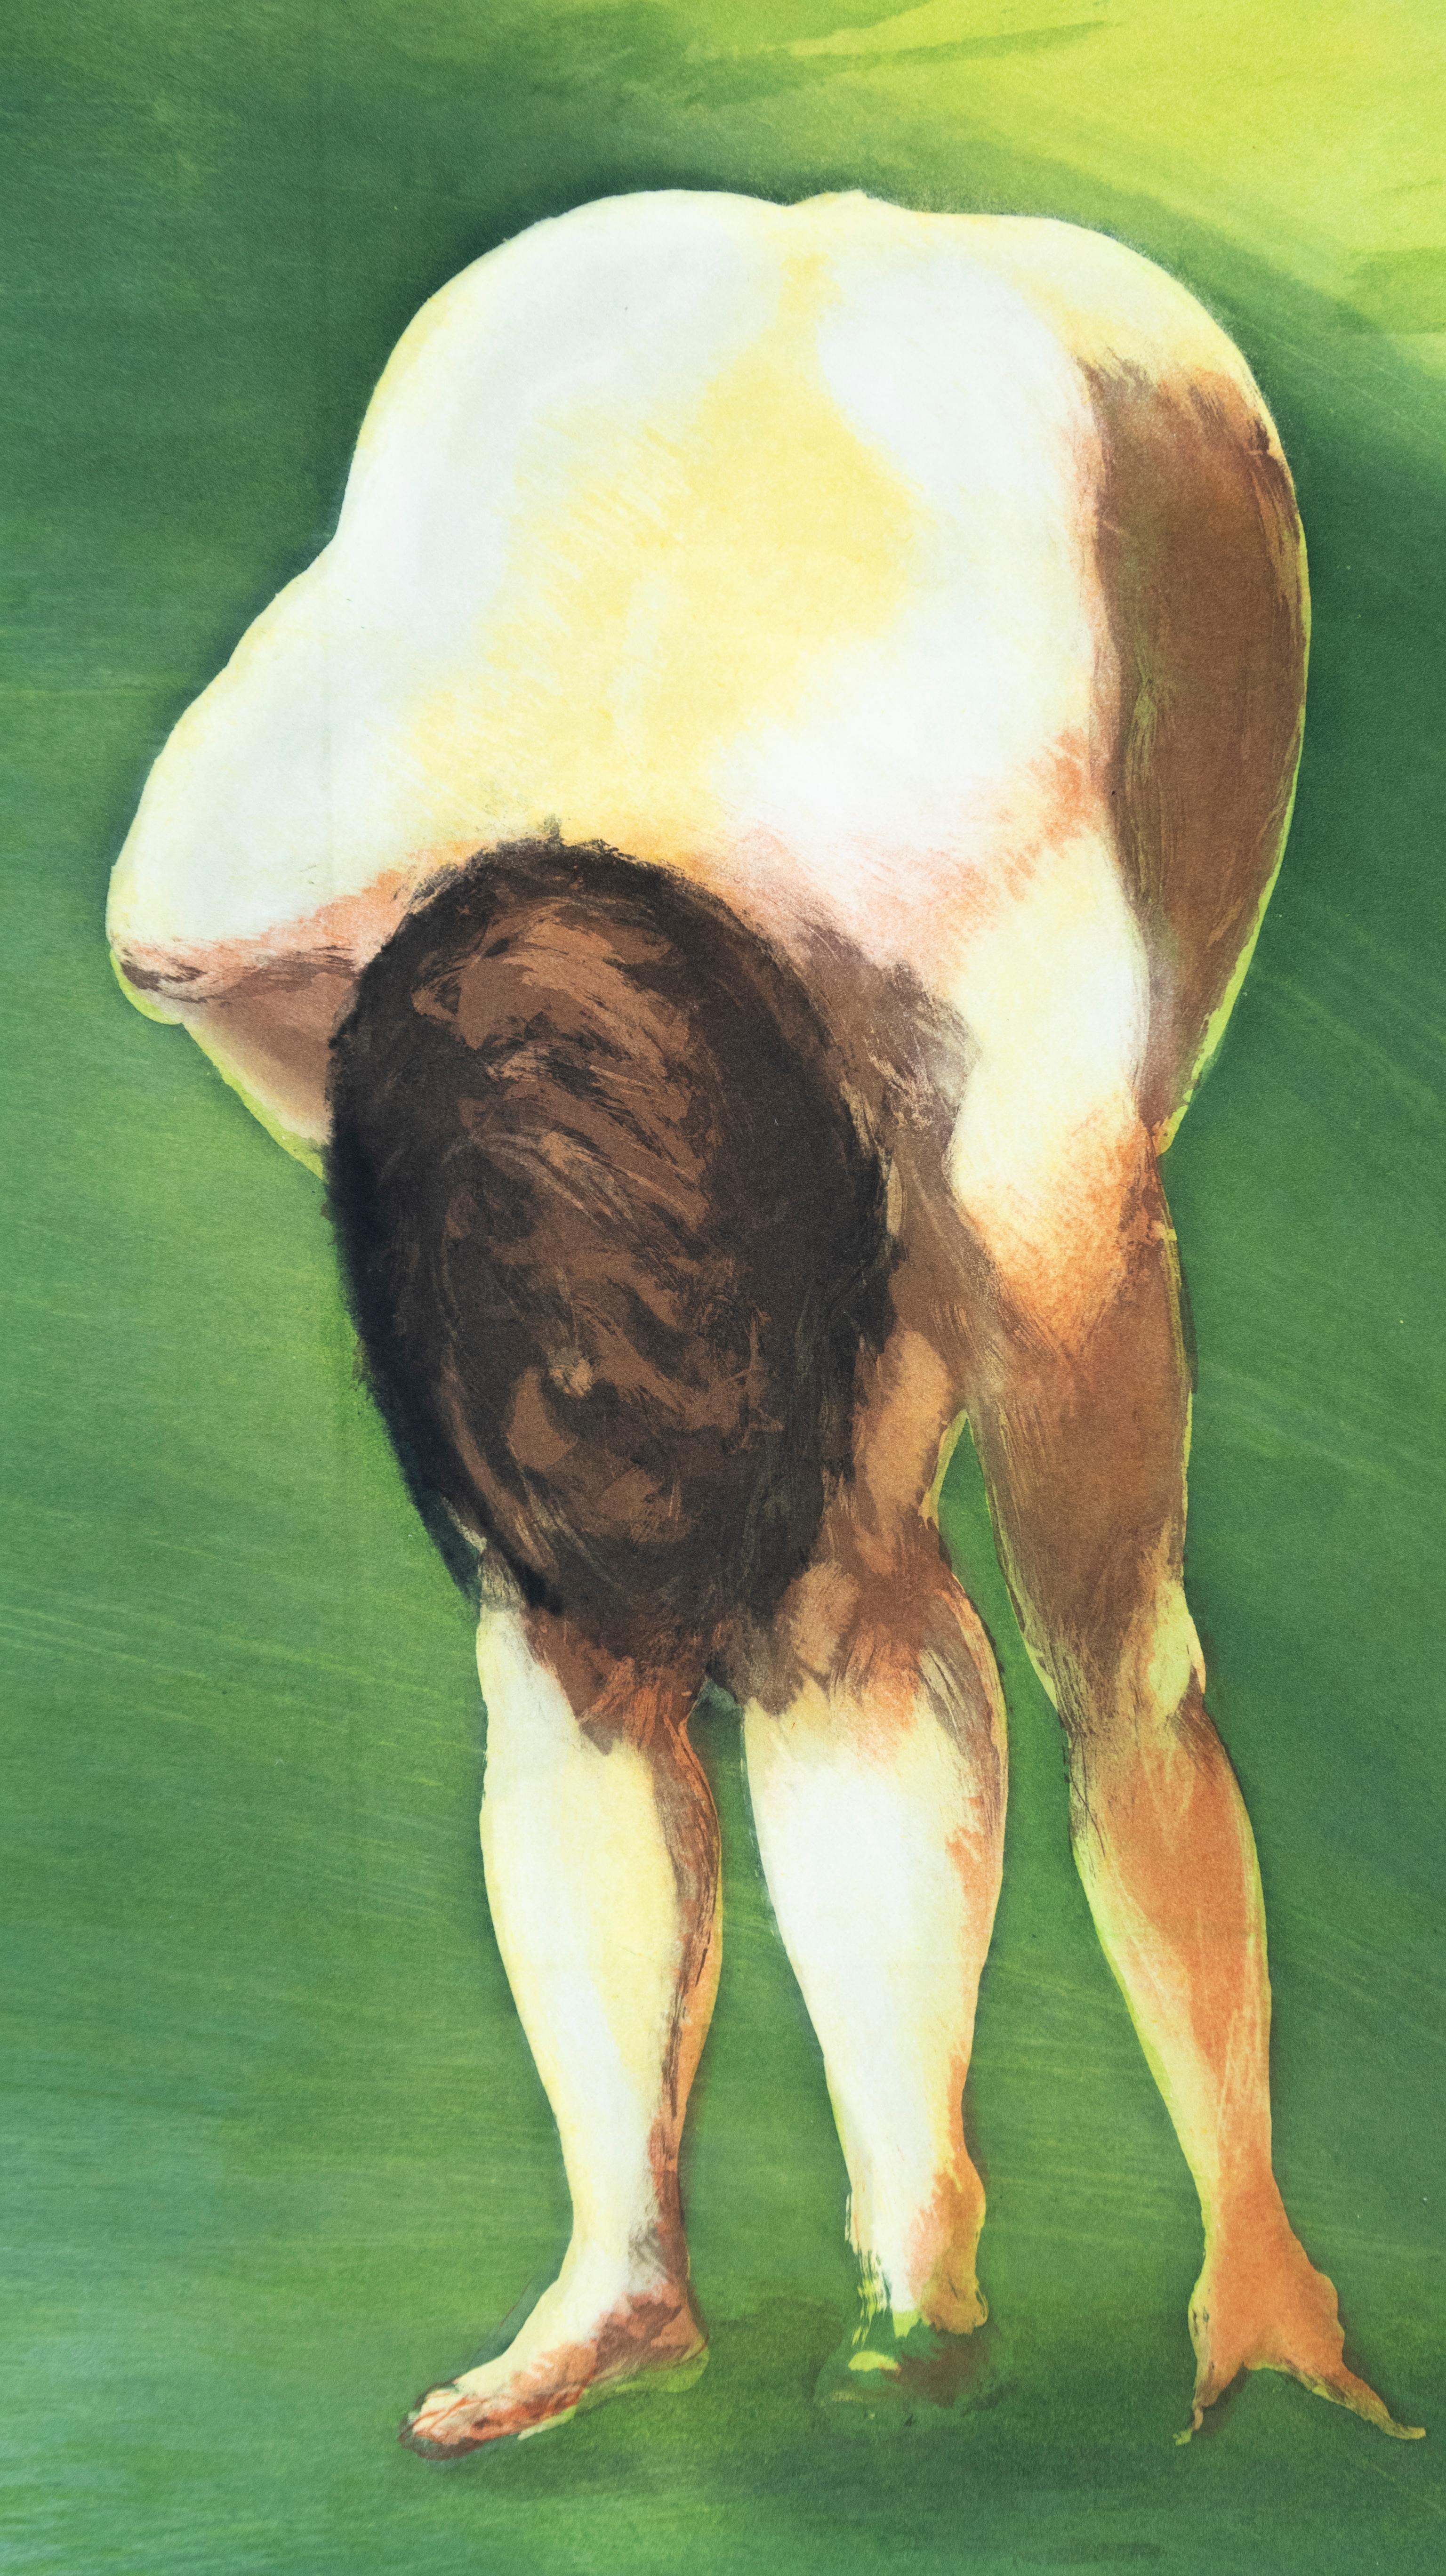 A nude figure bends down to touch the grass, which blooms across the composition in soft clouds of green. This idyllic landscape is one of four beach scenes by Eric Fischl. Behind the figure, a dog trots, idly regarding the youth.  Fischl creates